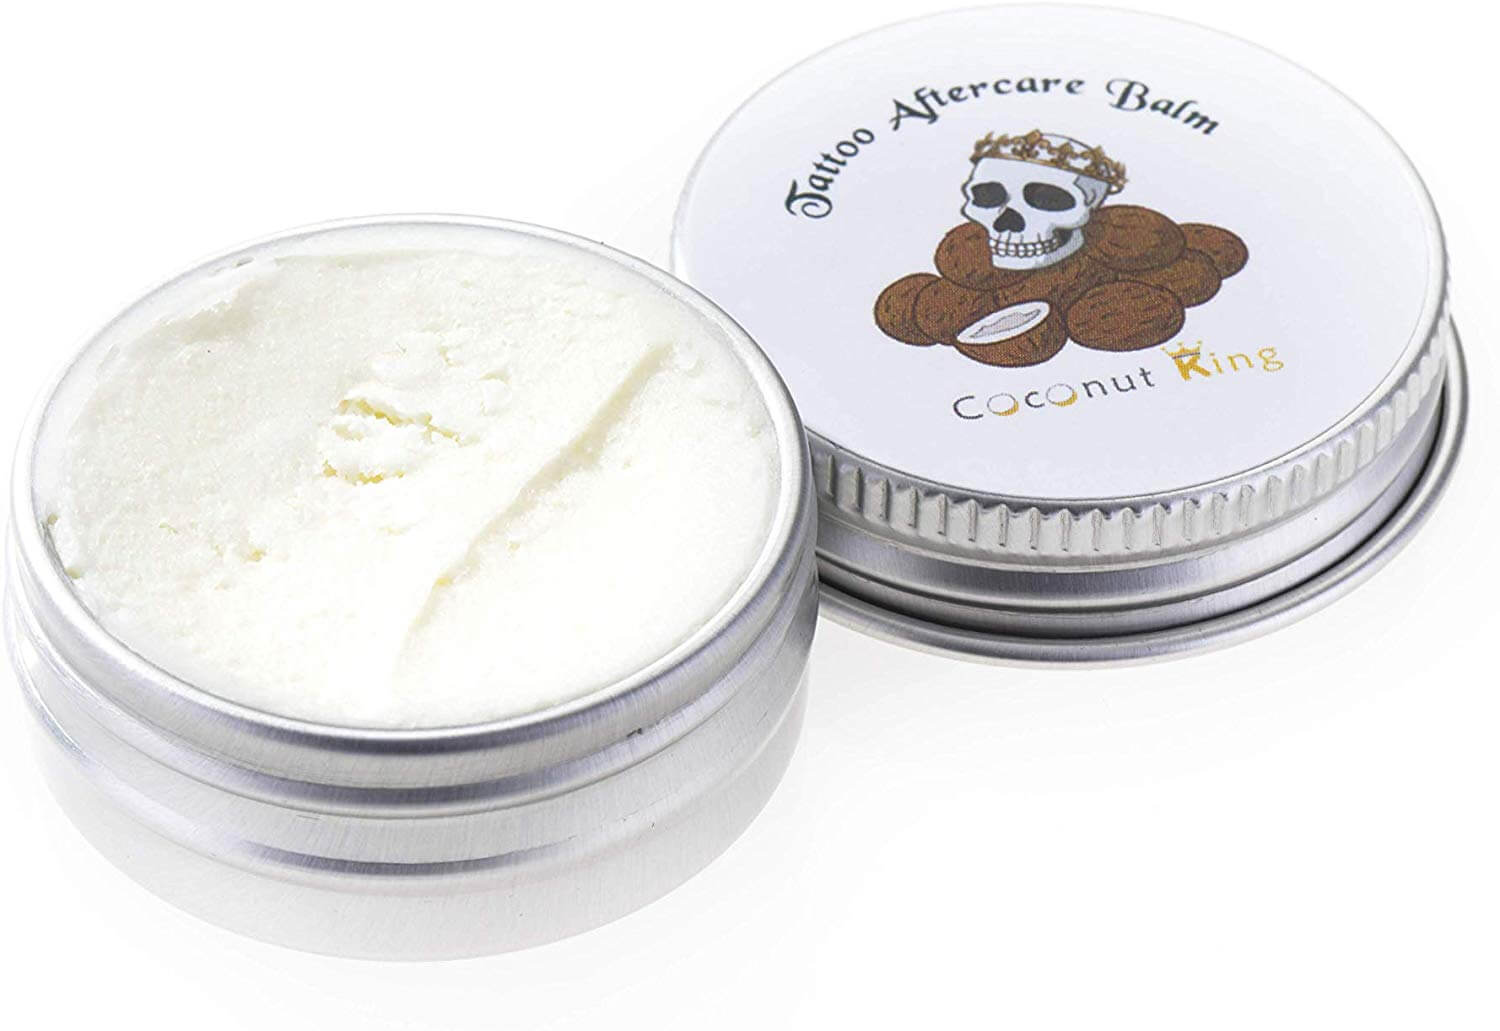 Coconut King is affordable and is generally regarded as a good tattoo aftercare product